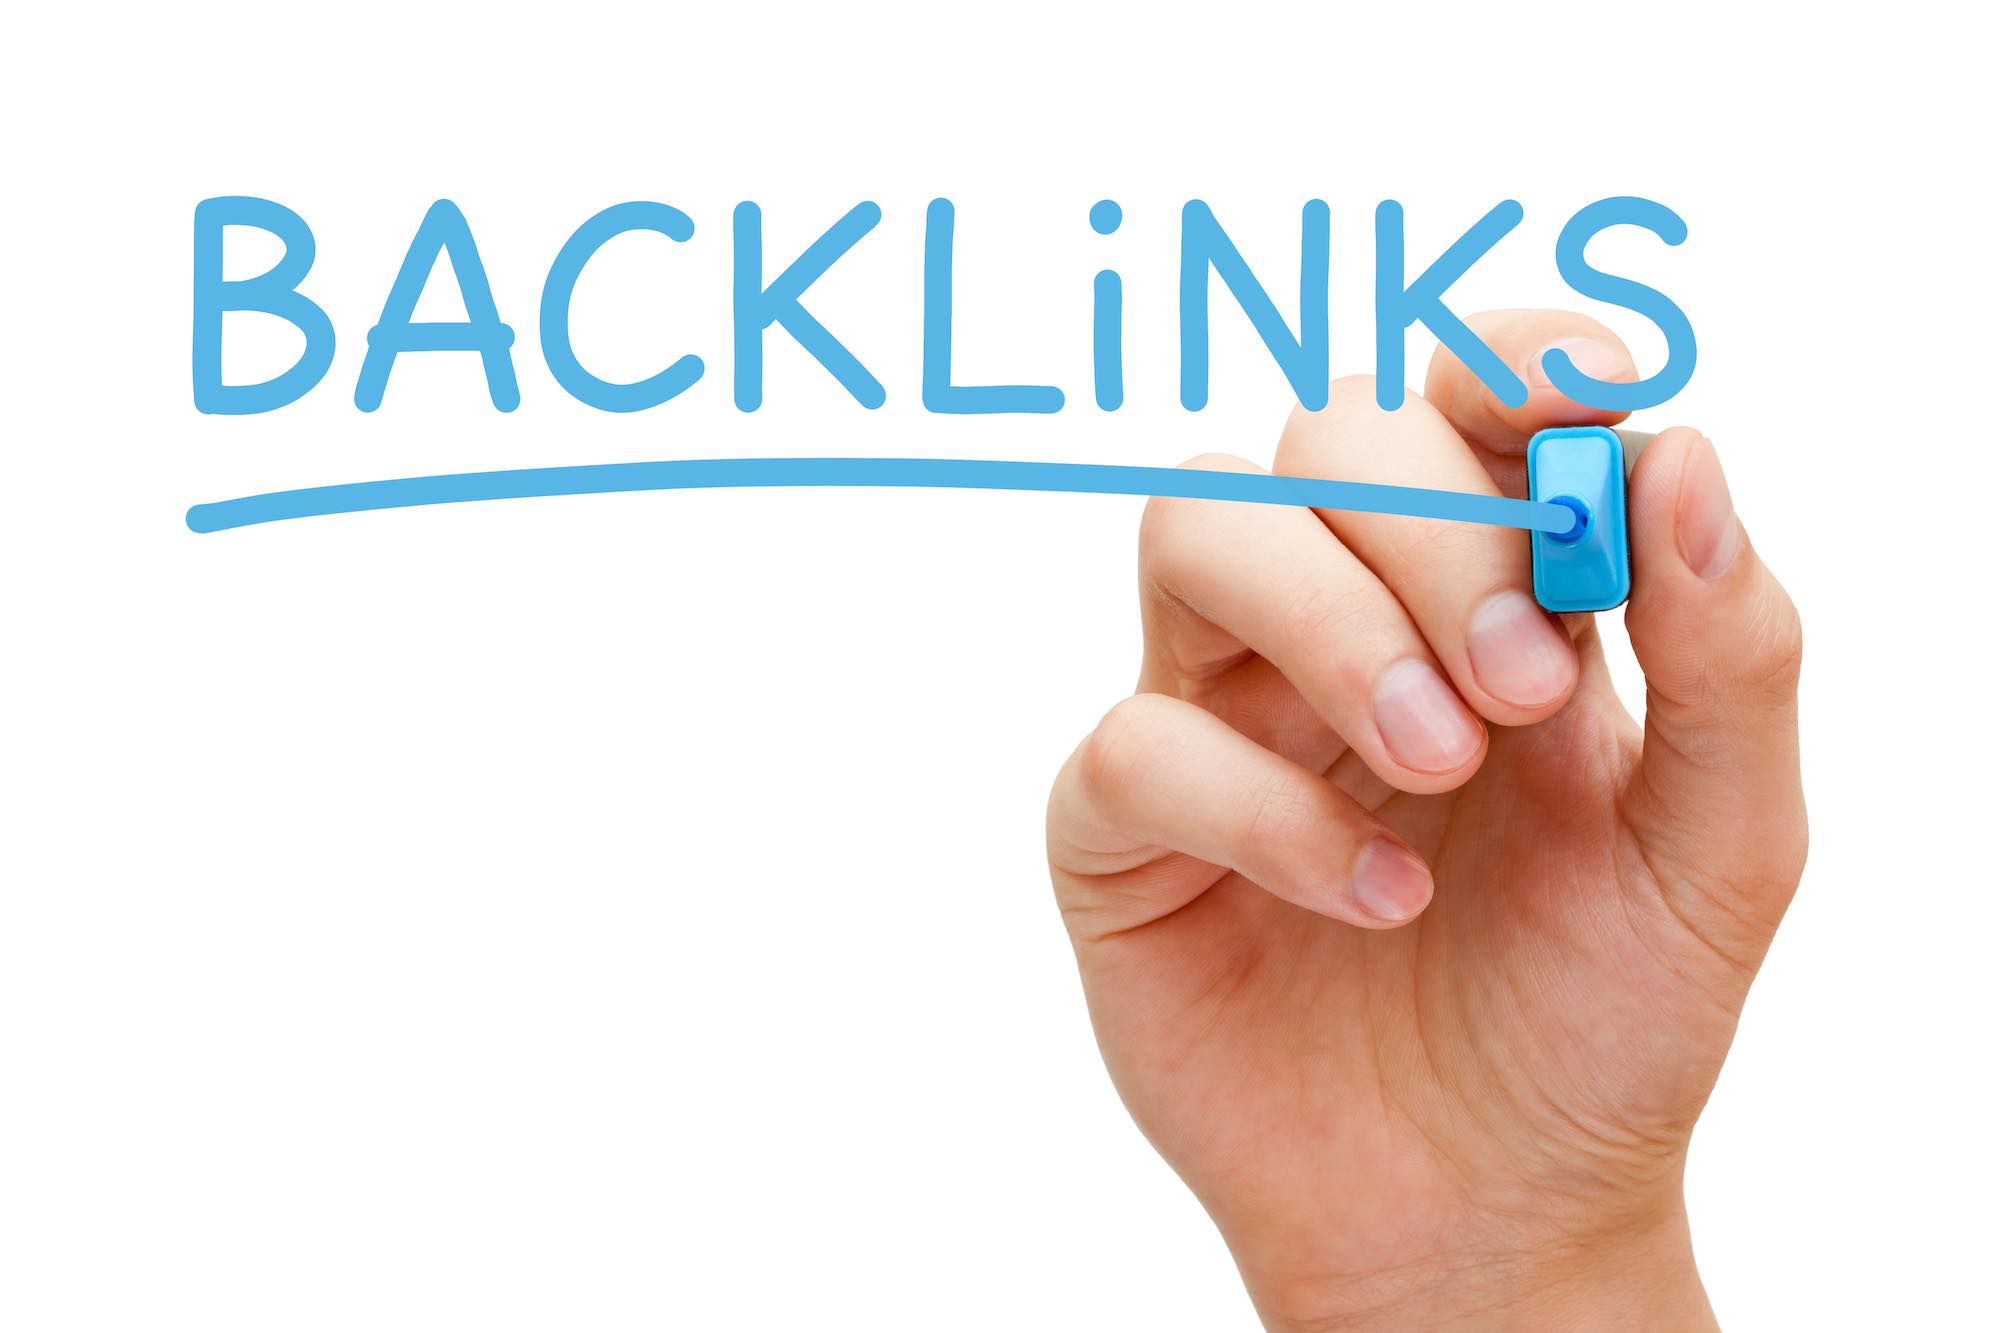 How to Get Backlinks as a Doctor